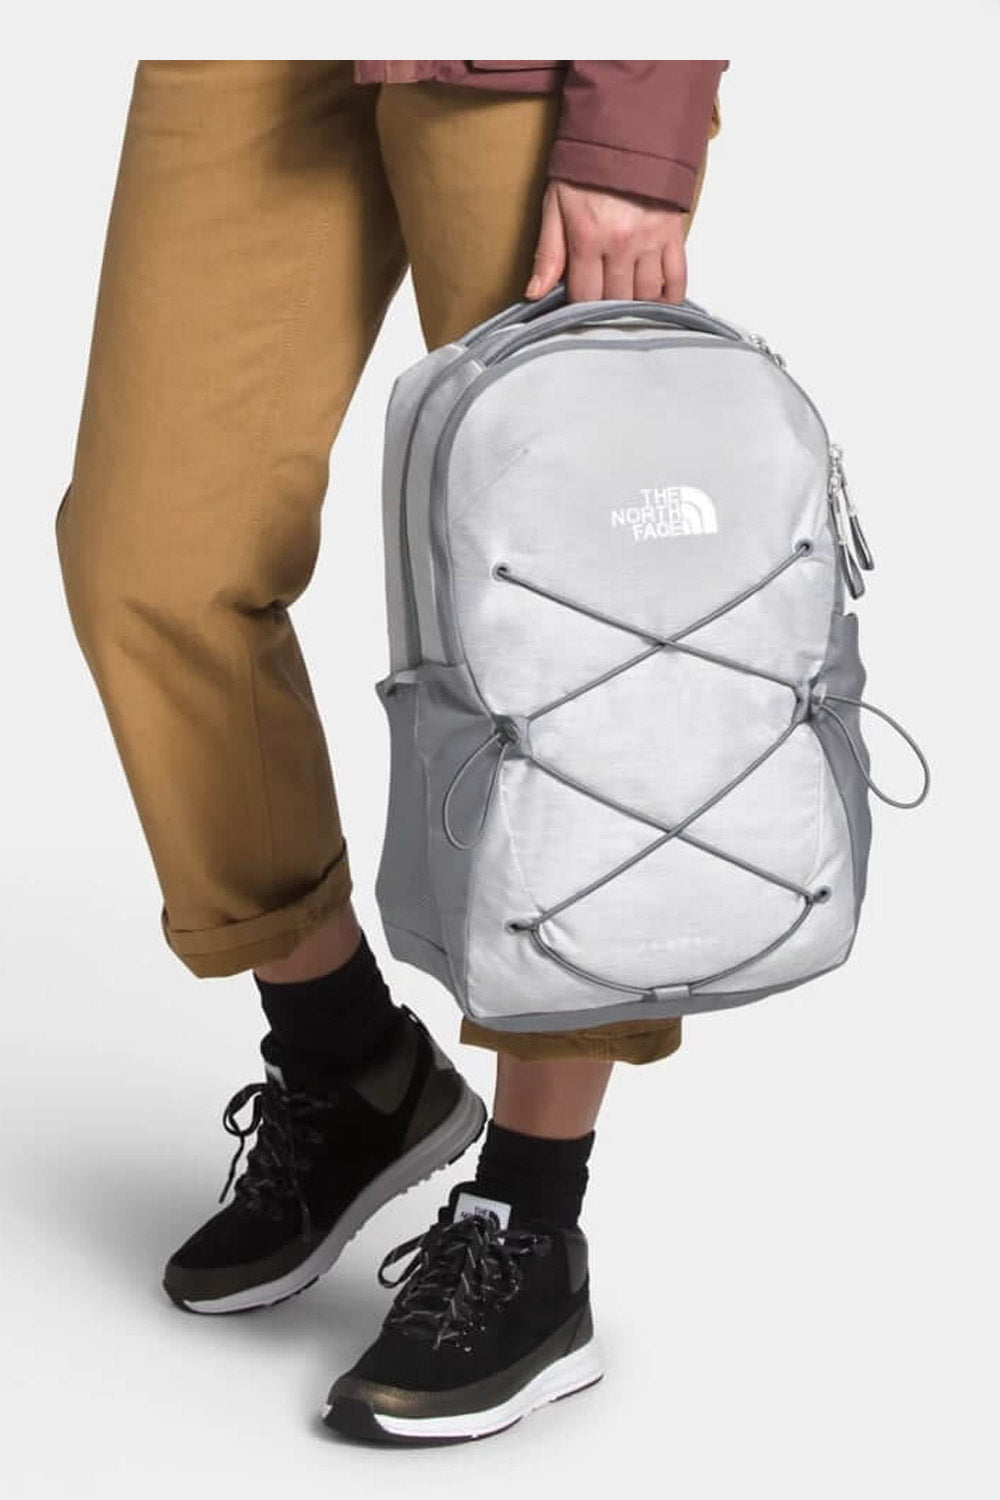 The North Face Jester Backpack for Women in White | NF0A3VXG-EP4